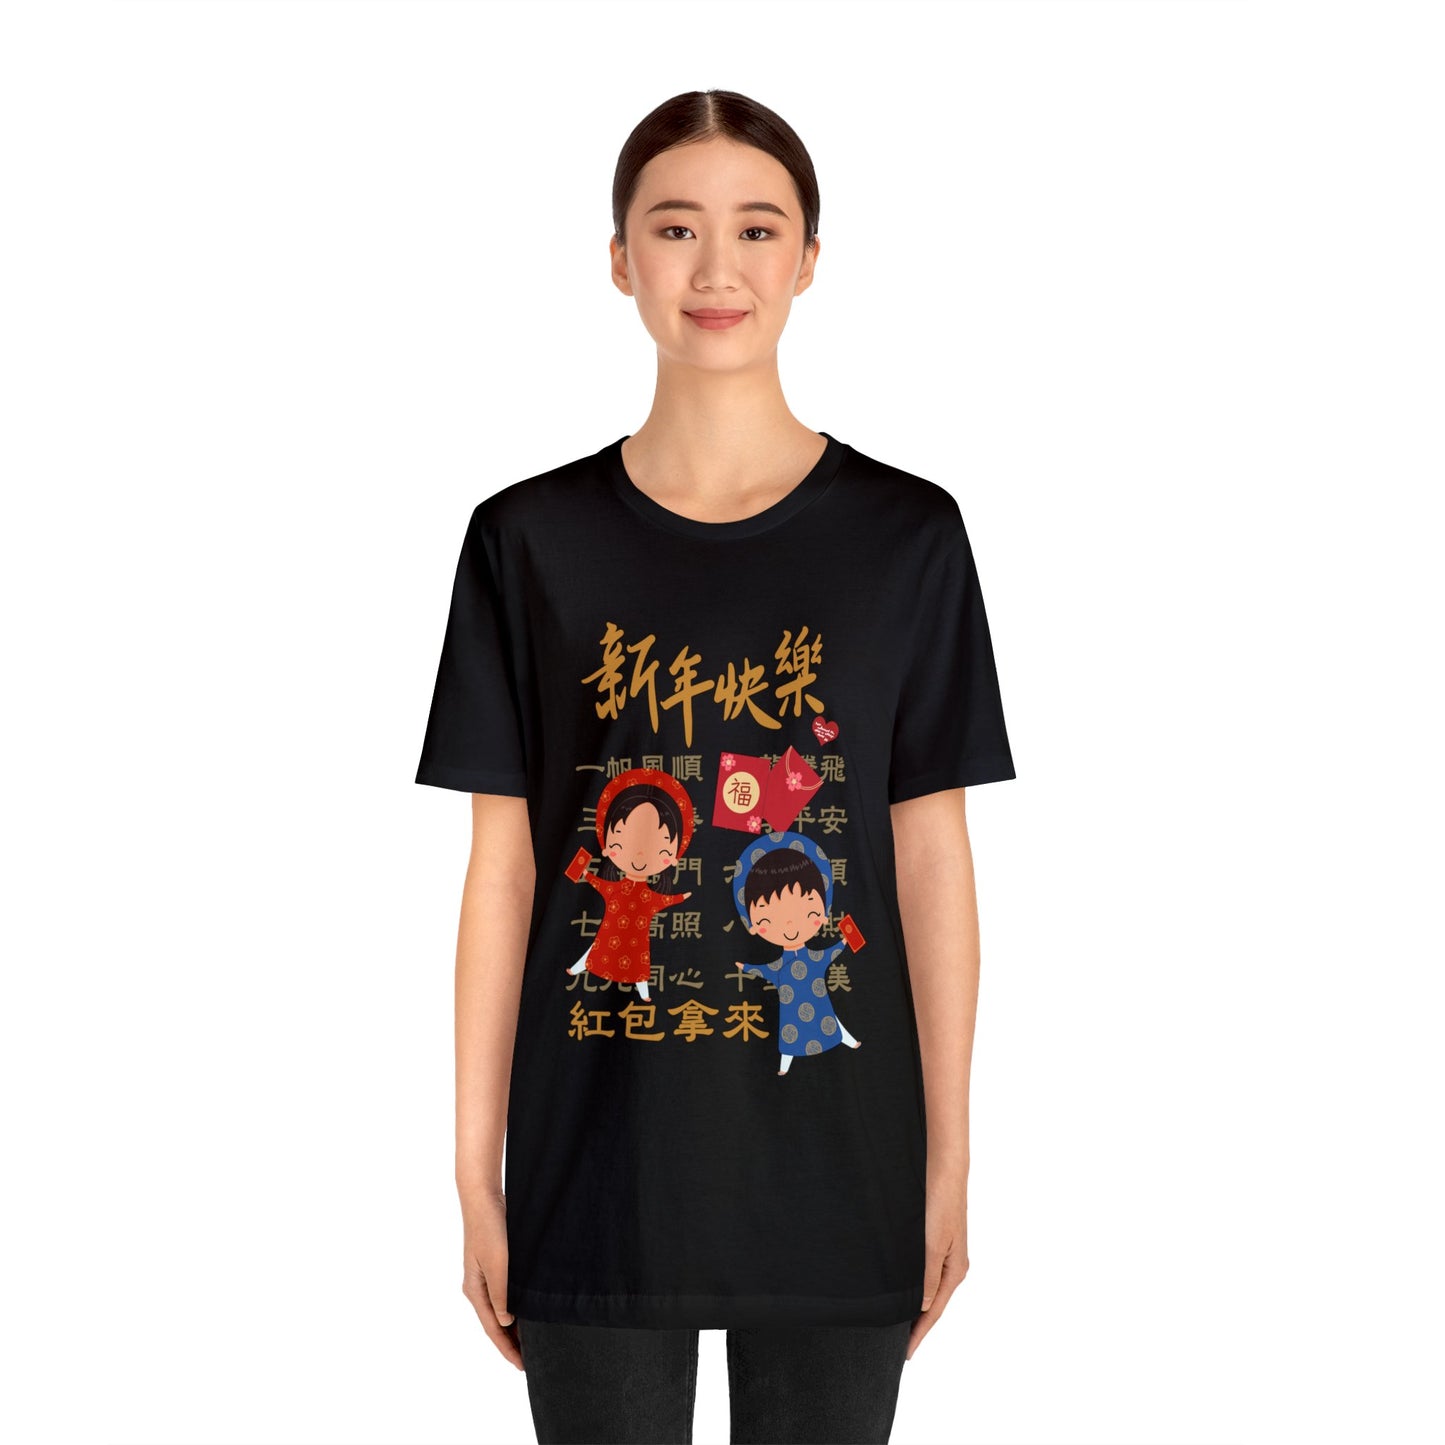 Unisex Happy Chinese New Year Kids and Idioms T-shirts